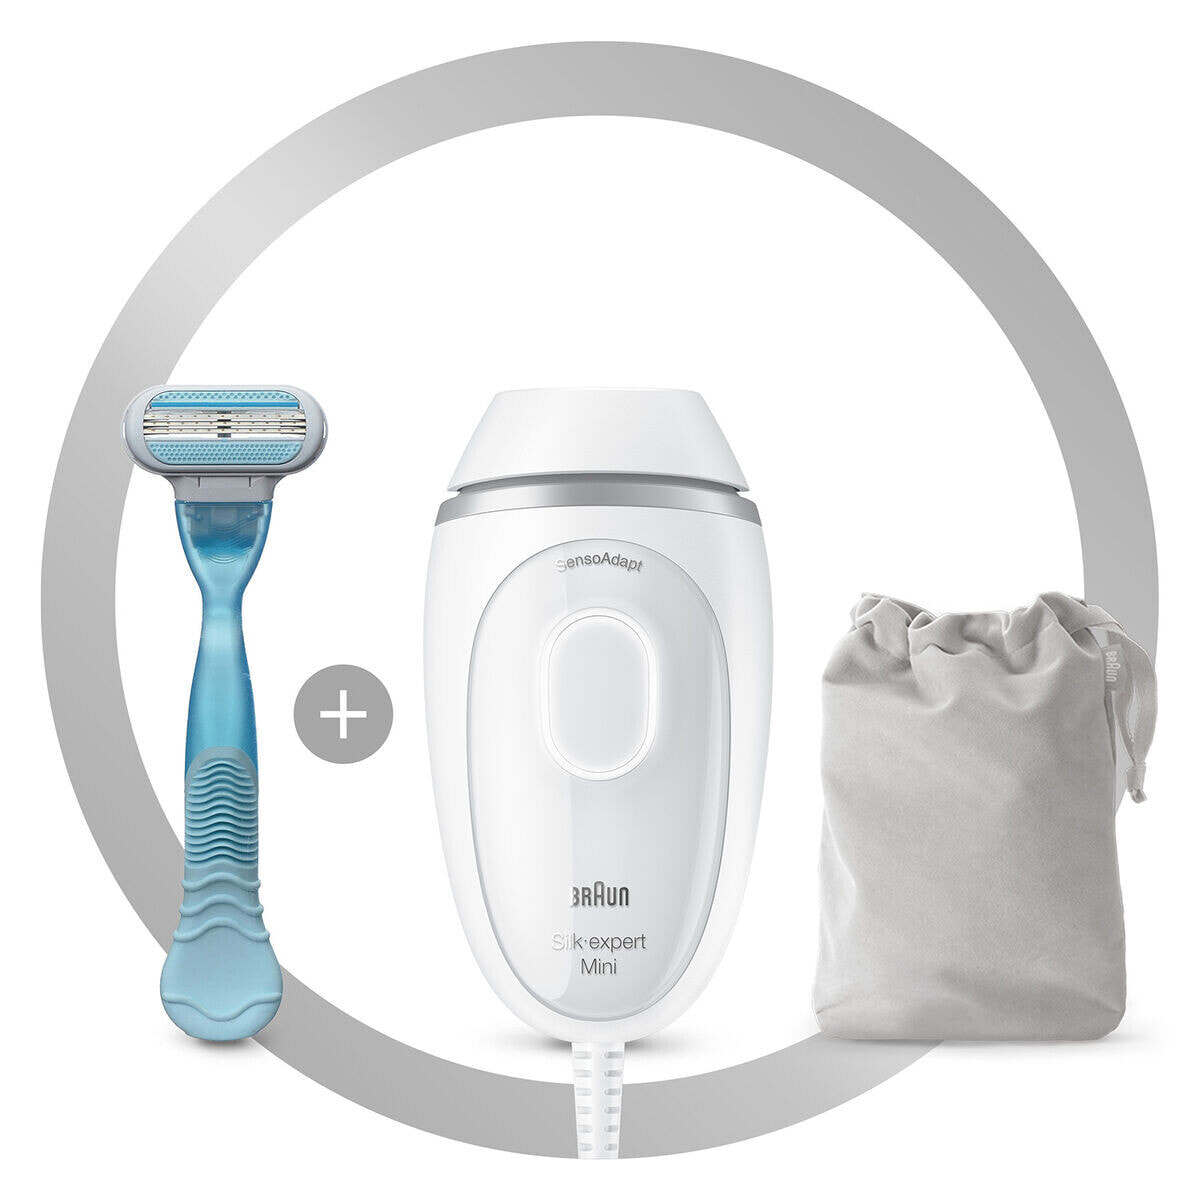 Intense Pulsed Light Hair Remover with Accessories Braun Mini PL1124